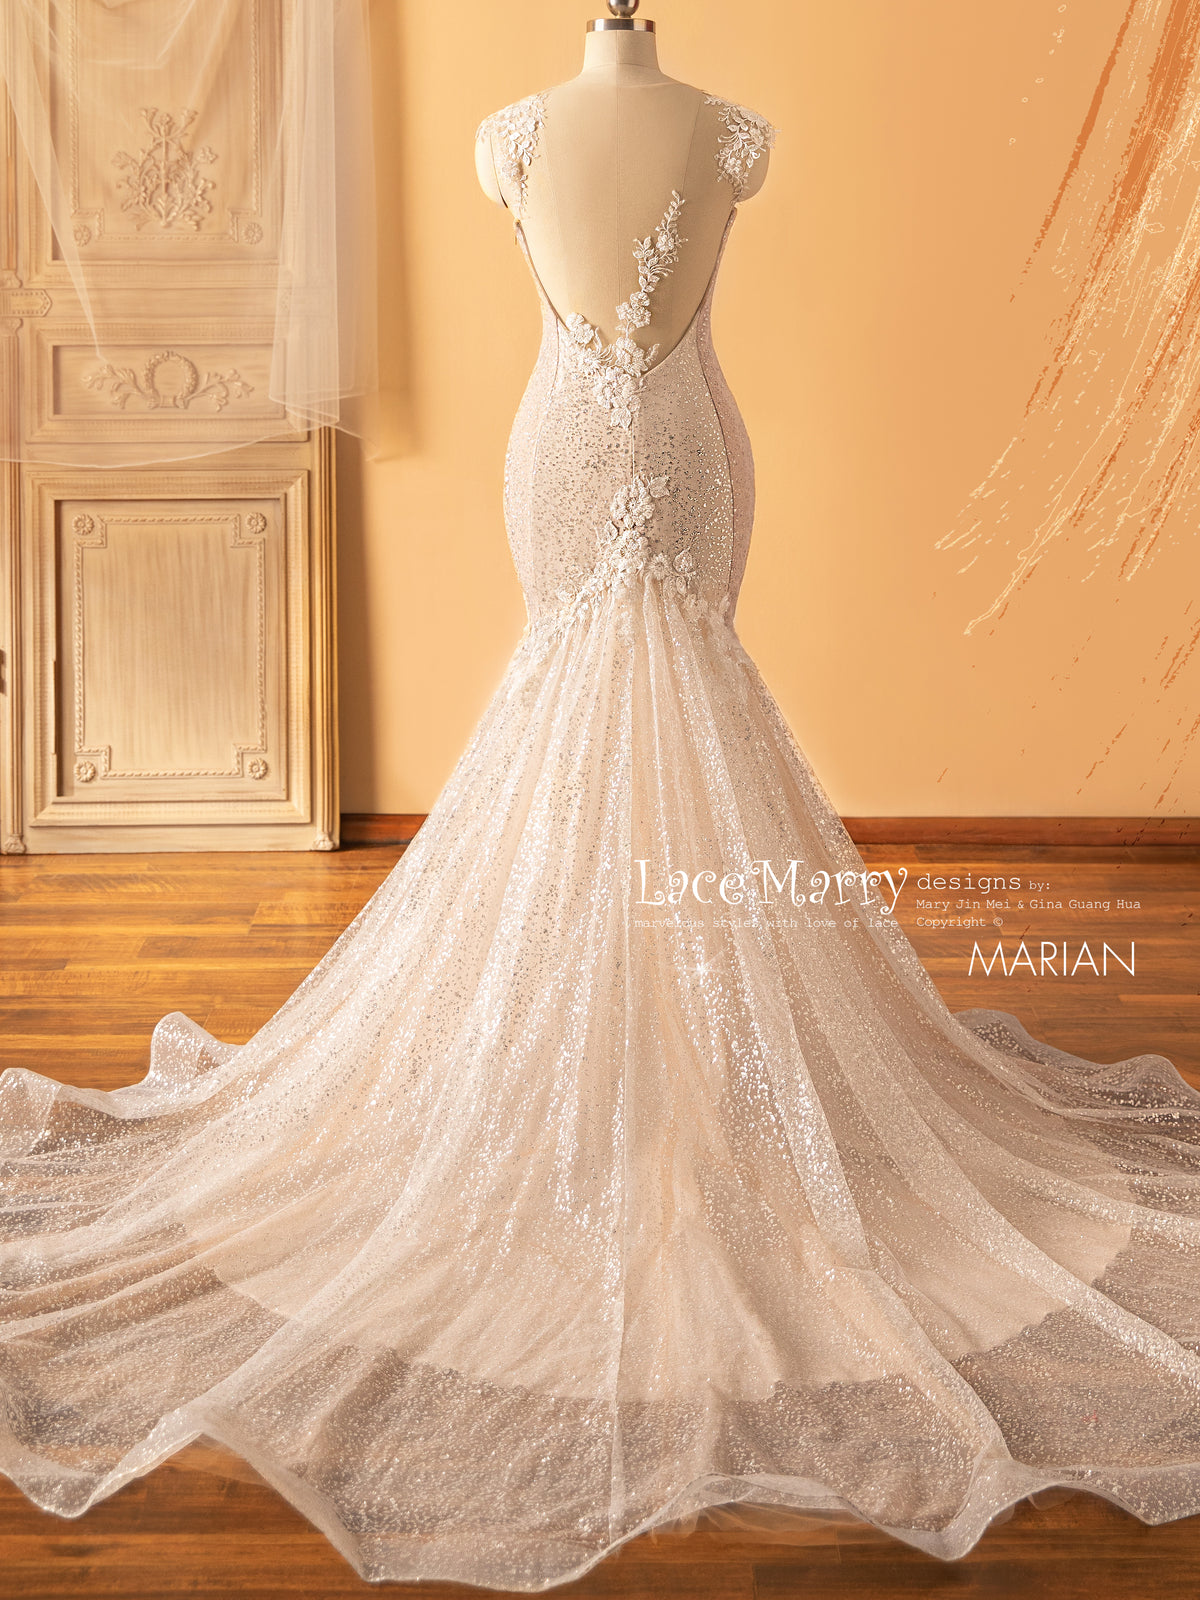 MARIAN / Fabulous Wedding Dress with All Around Sparkling